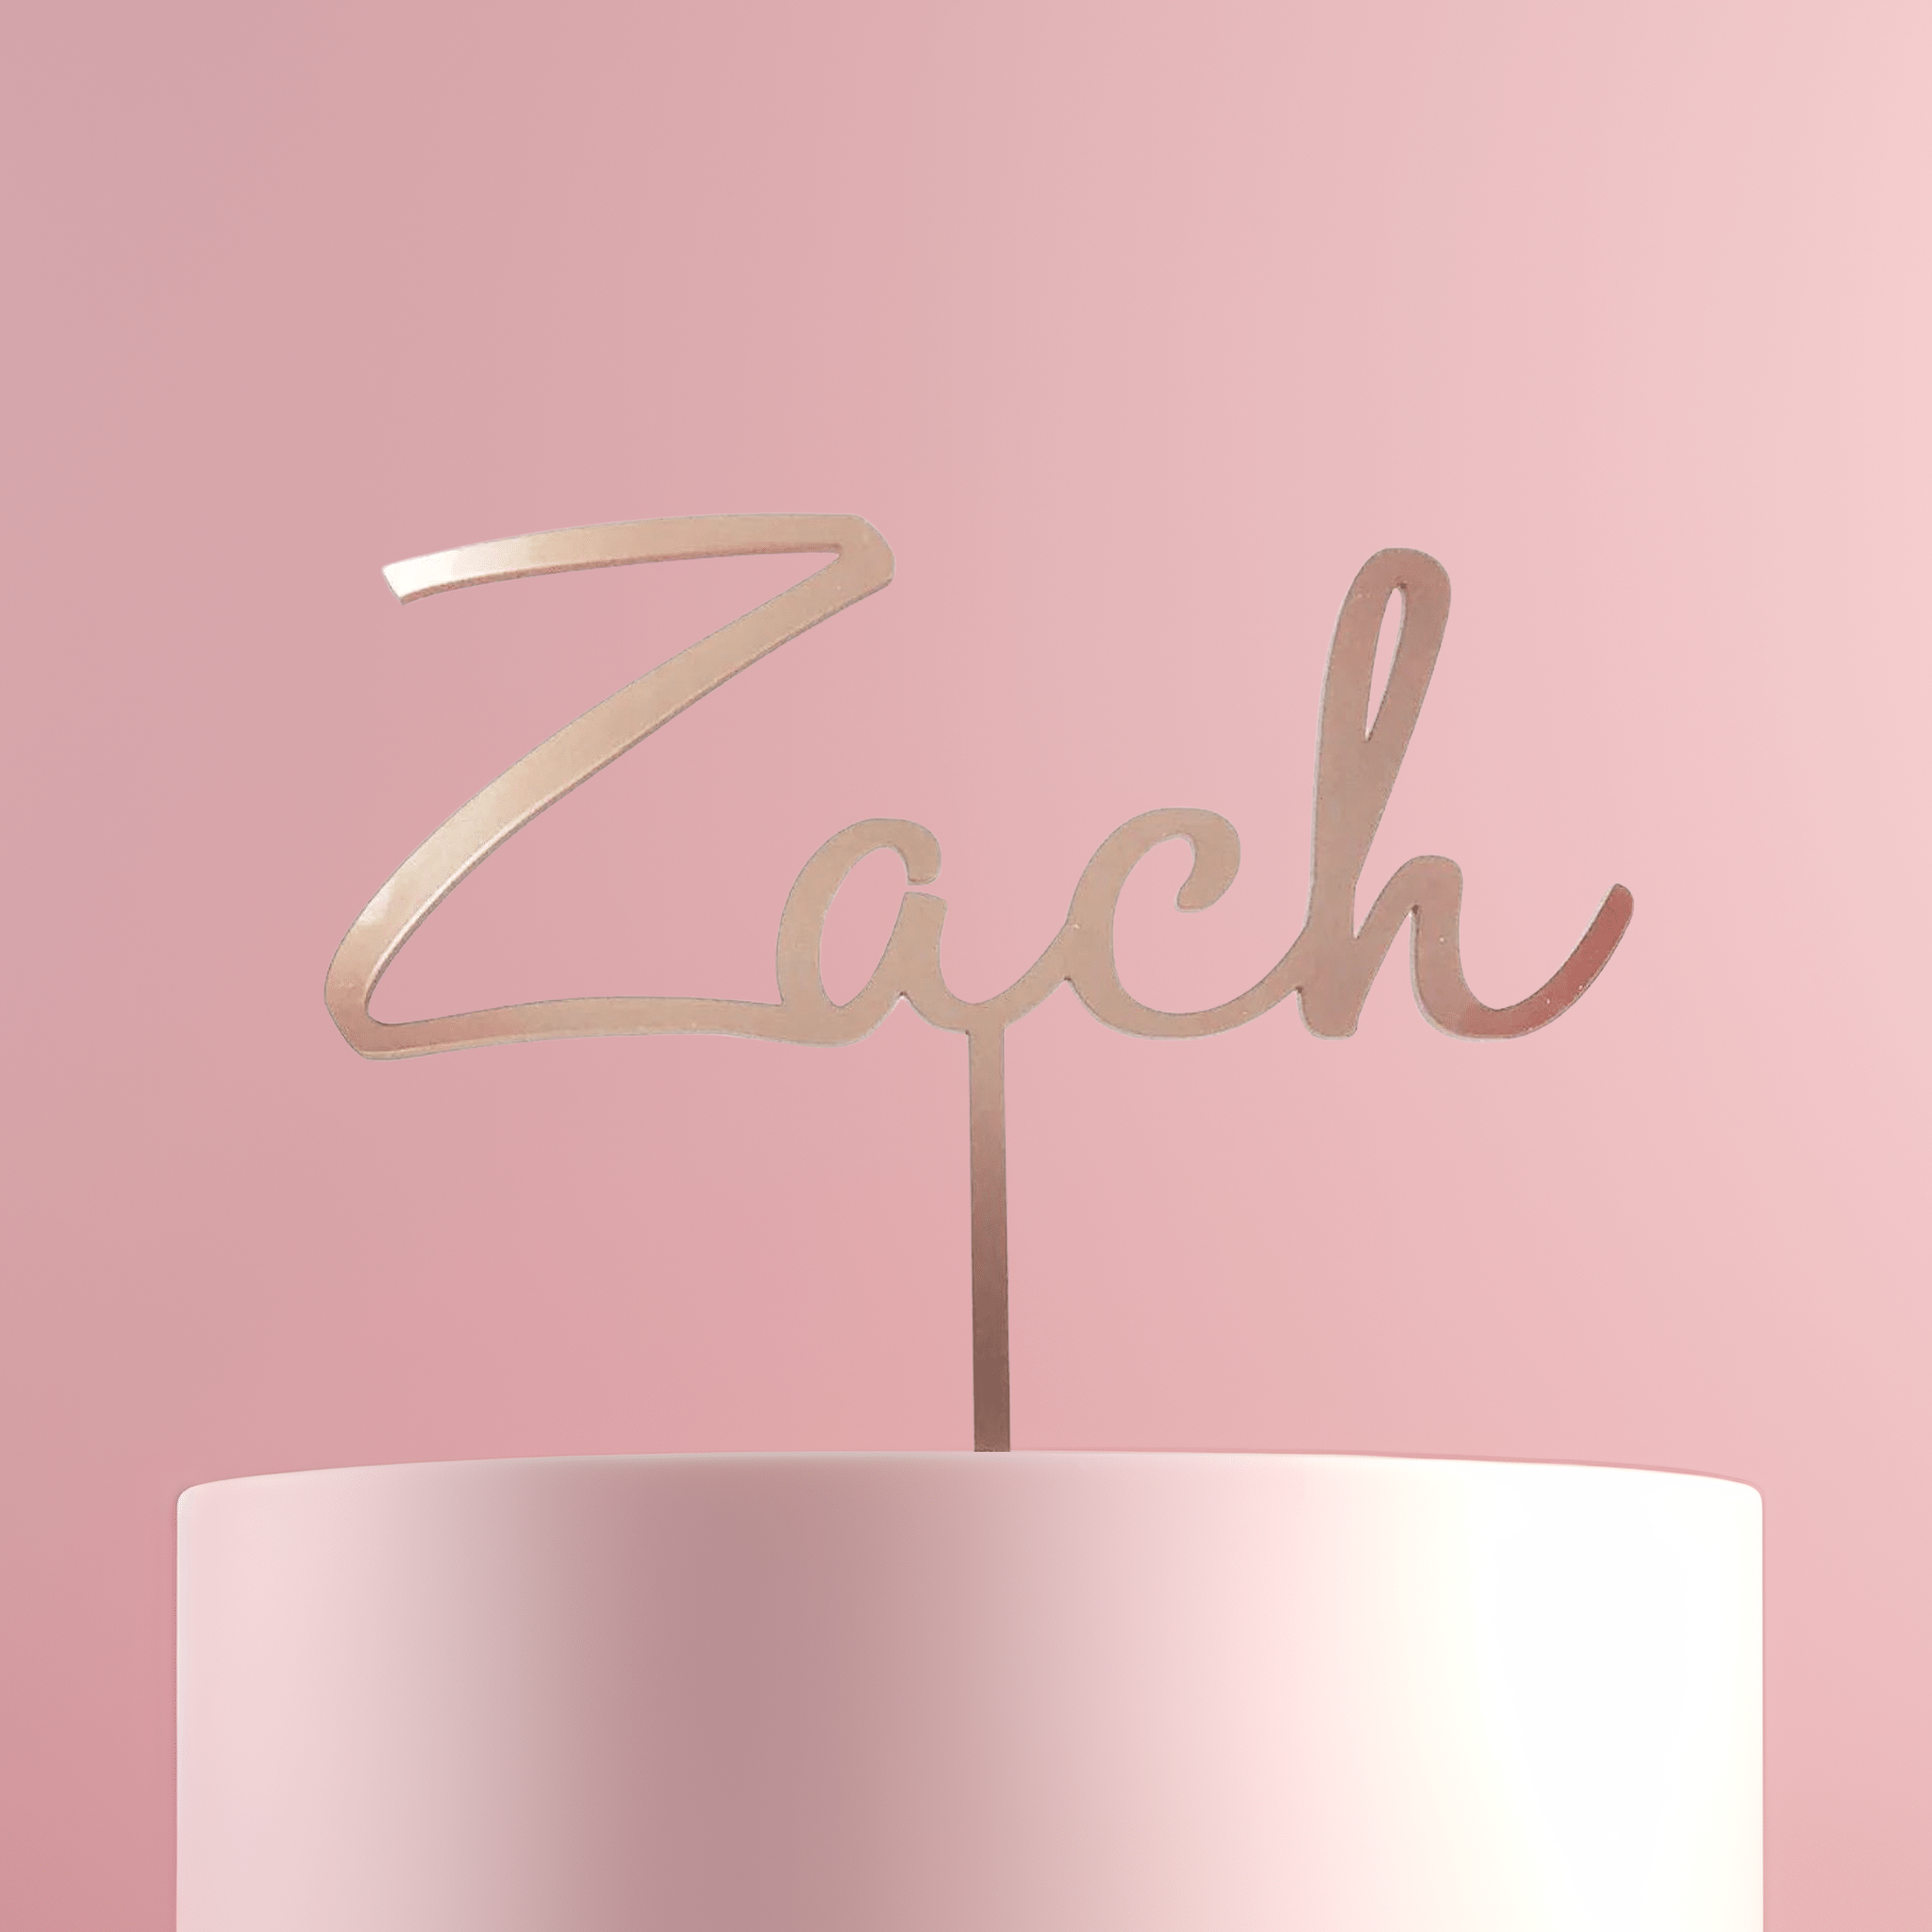 Personalised Name Cake Topper - Cake Topper